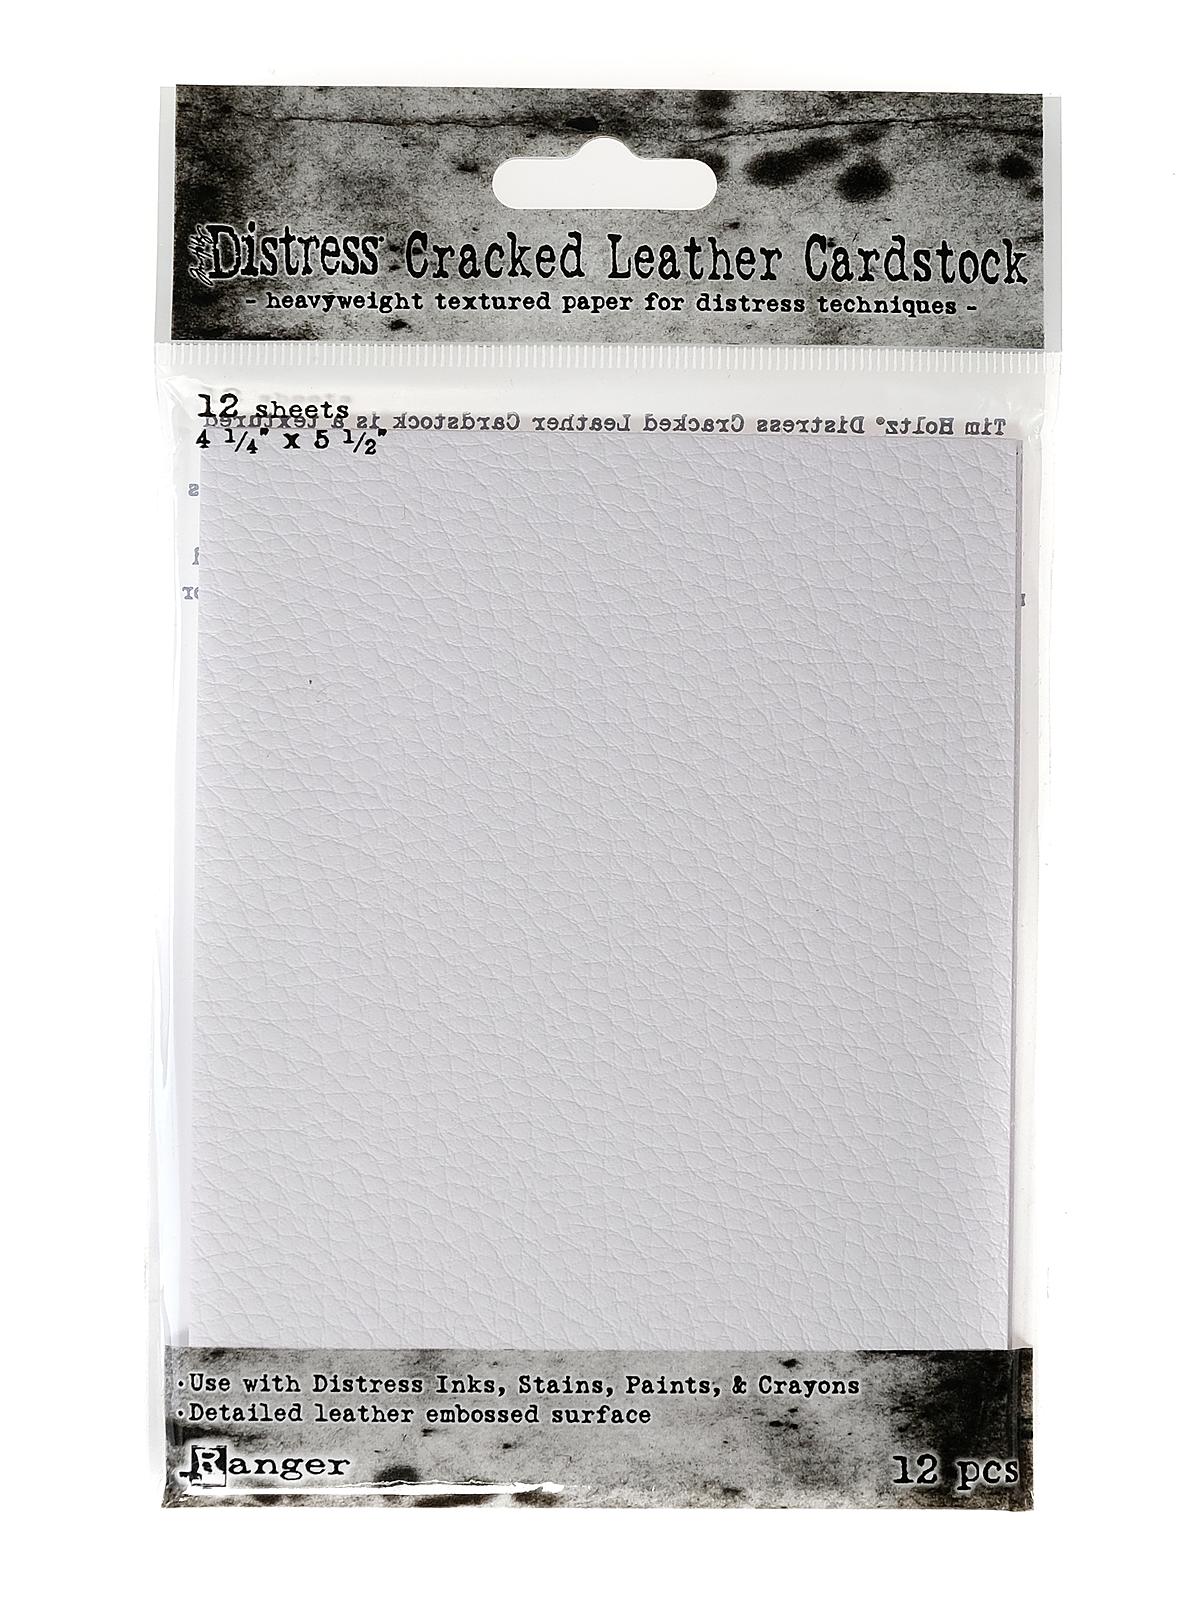 Tim Holtz Distress Cracked Leather Cardstock 4 1 4 In. X 5 1 2 In. Pack Of 12